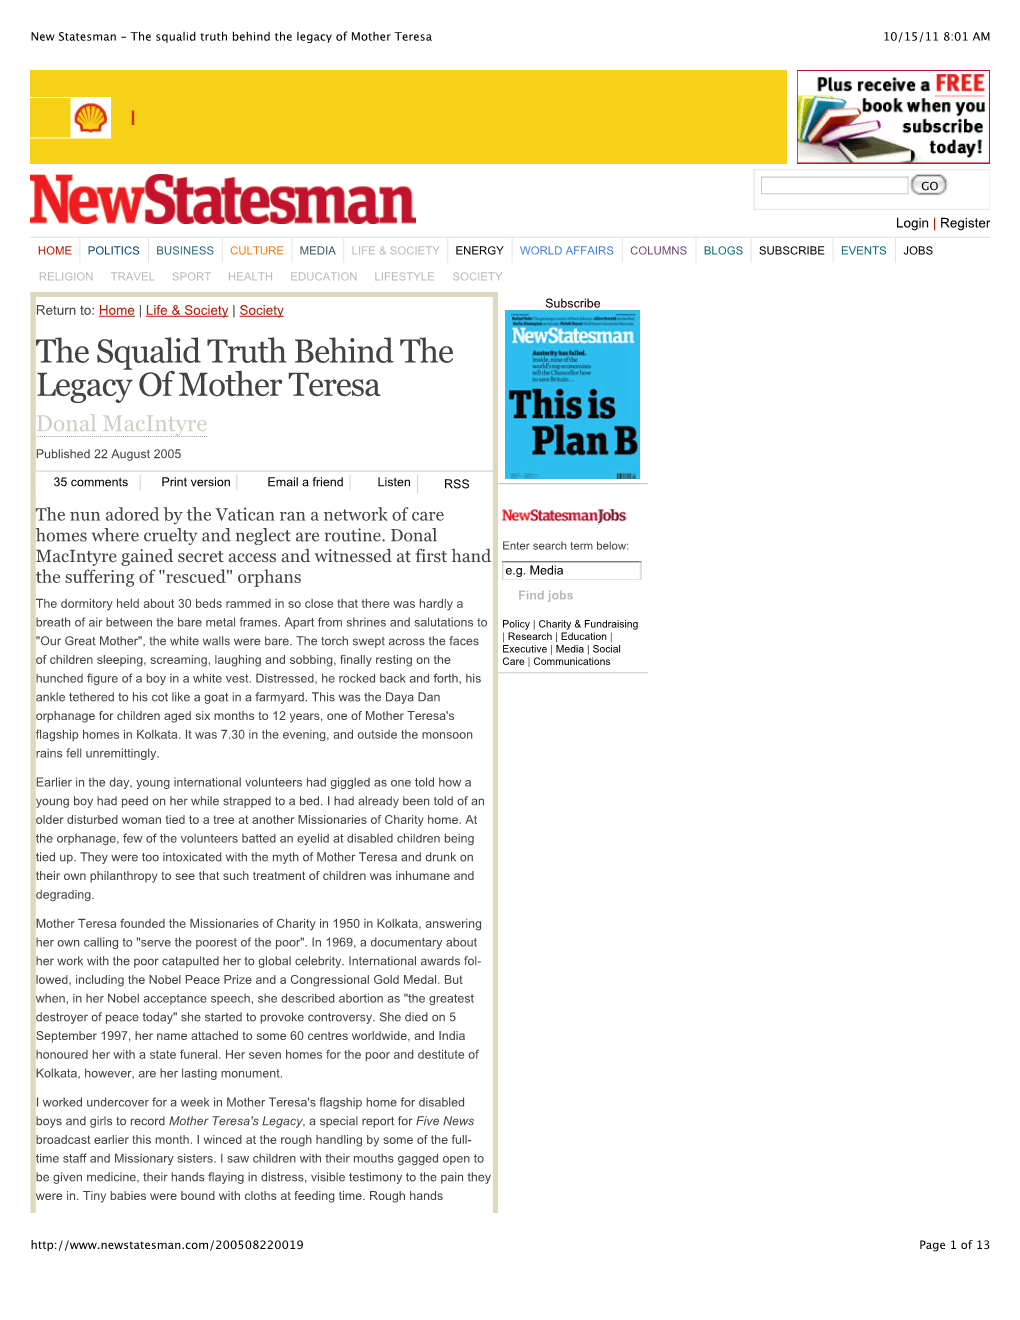 New Statesman - the Squalid Truth Behind the Legacy of Mother Teresa 10/15/11 8:01 AM